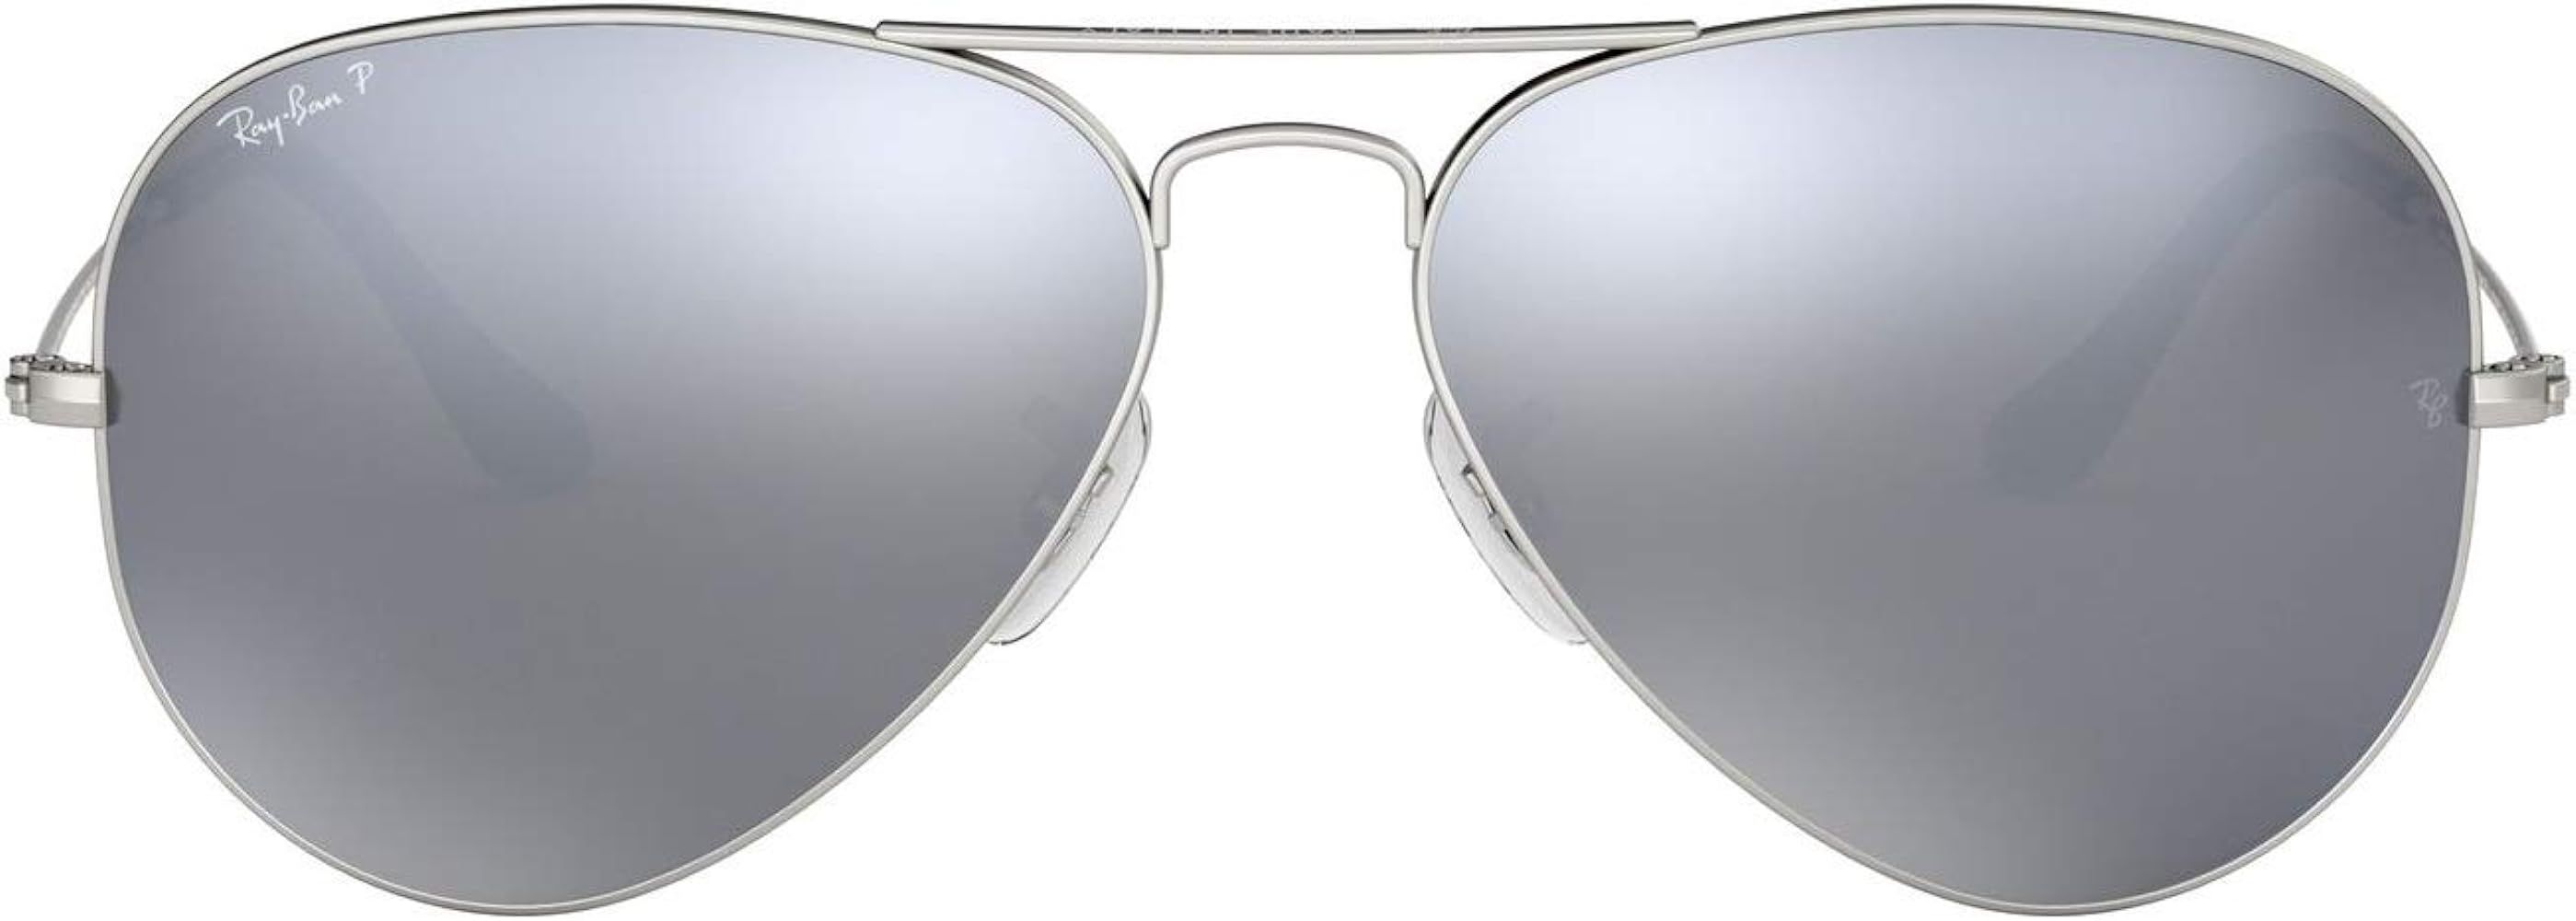 Ray Ban RB3025 AVIATOR LARGE METAL Polarized Sunglasses For Men For Women + BUNDLE with Eyewear Care | Amazon (US)